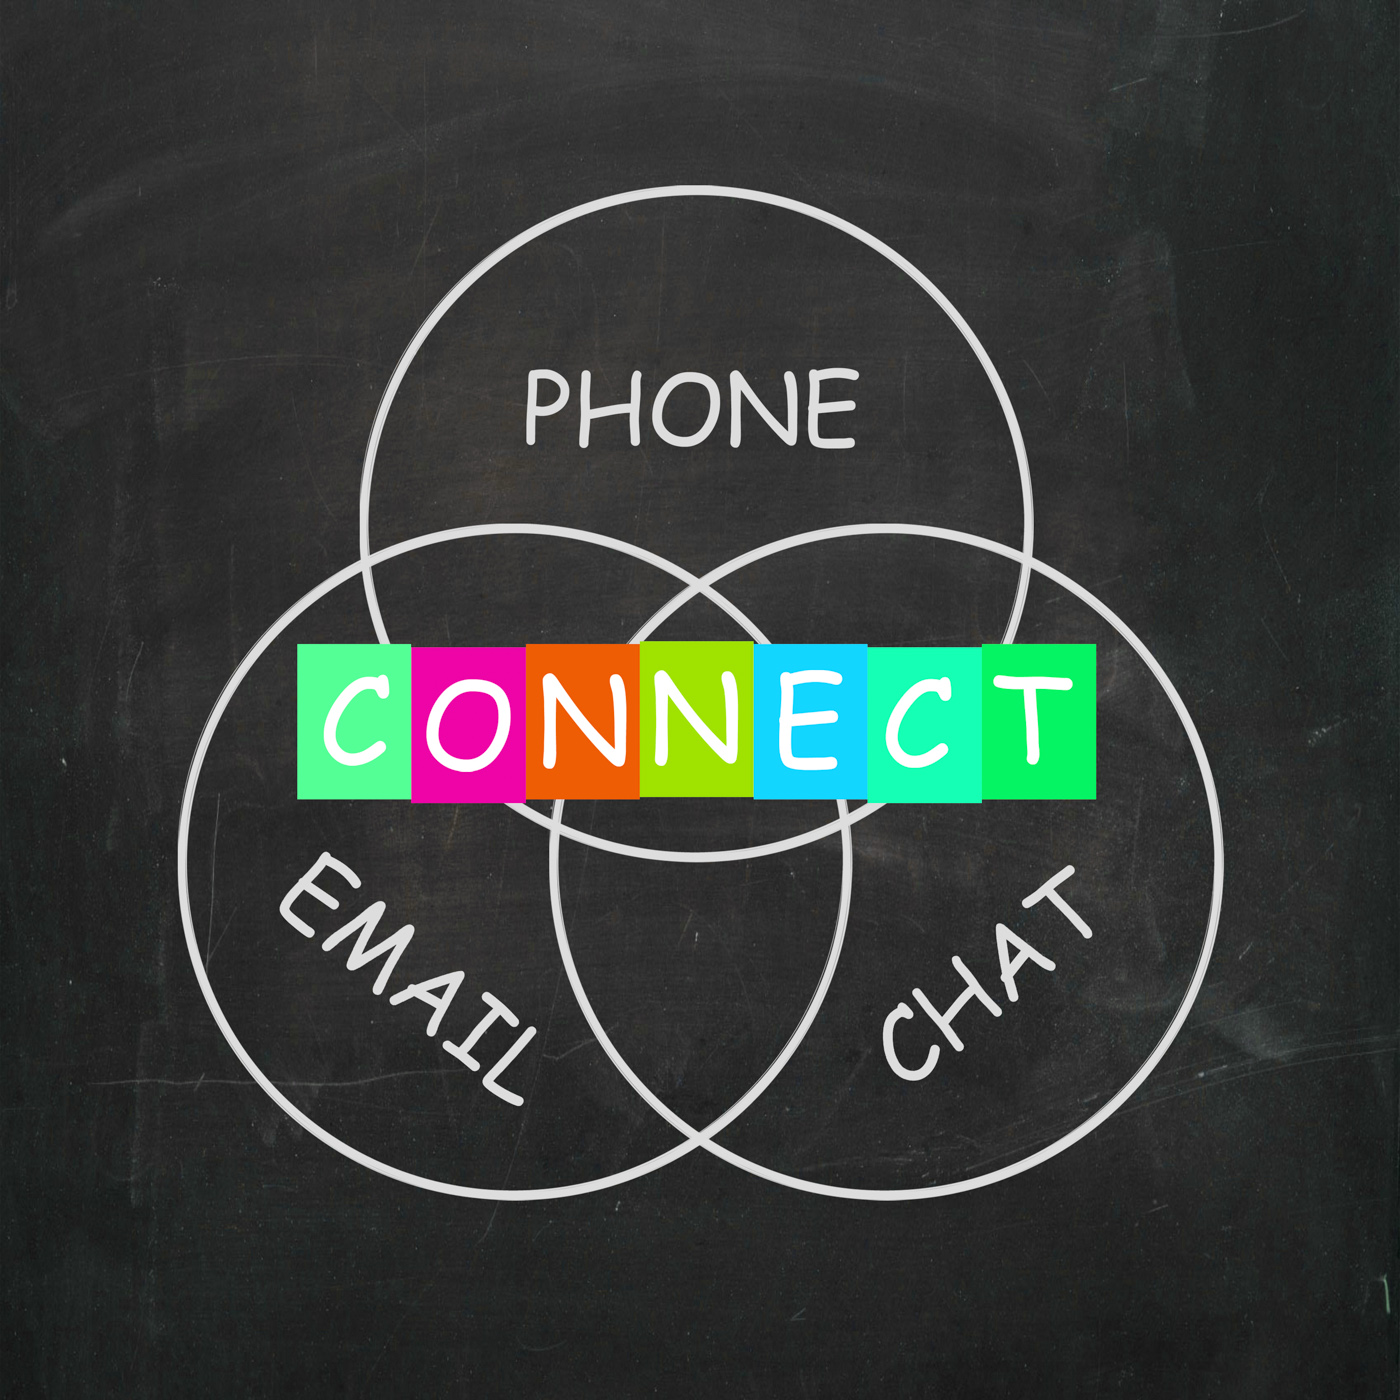 Words means connect by phone email or chat photo